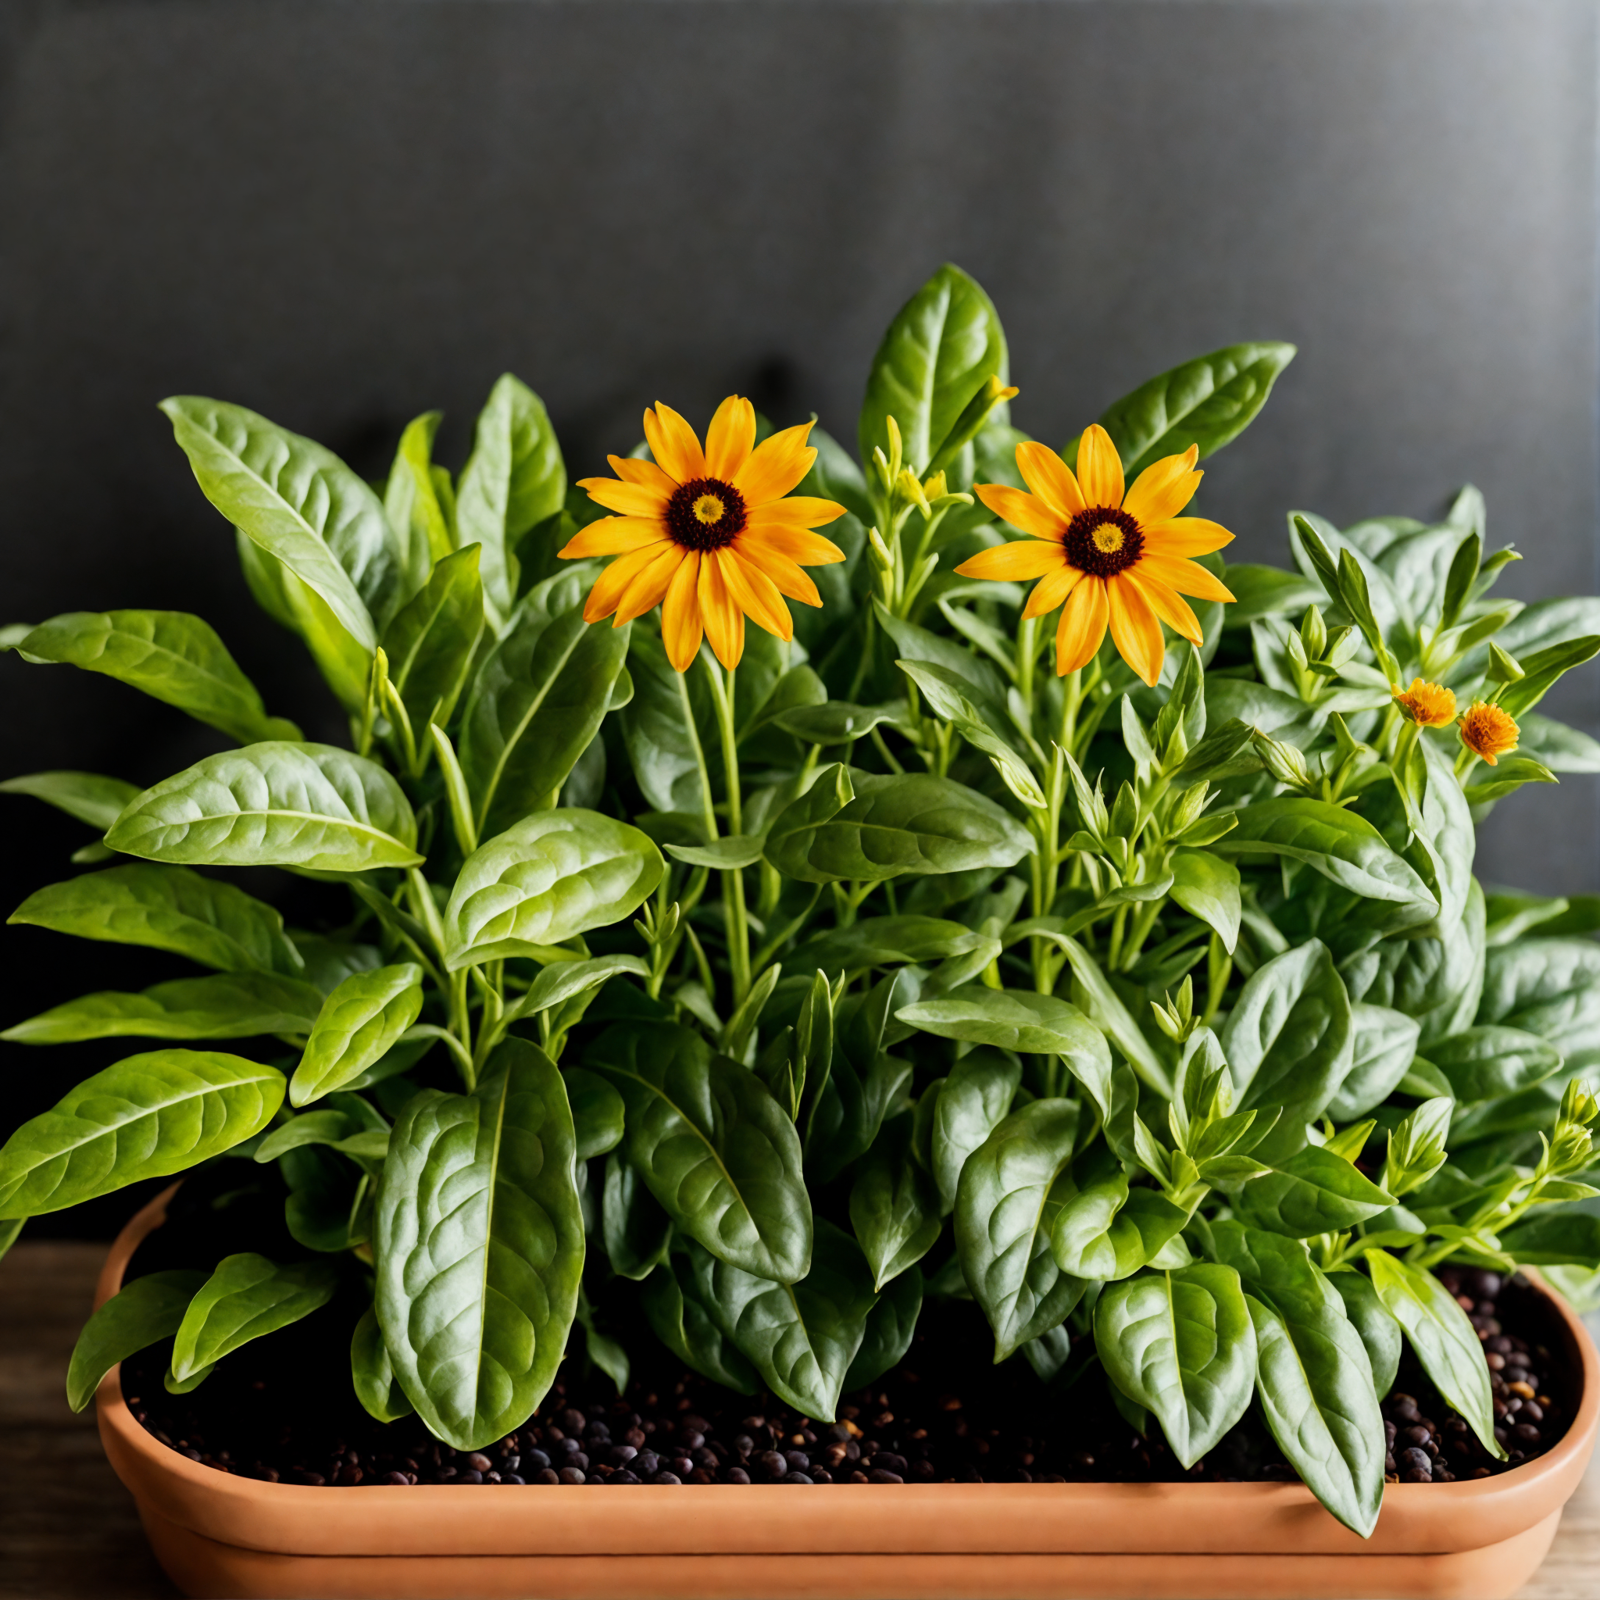 Rudbeckia hirta, with vibrant yellow petals, arranged in a bowl on a table, against a dark background.